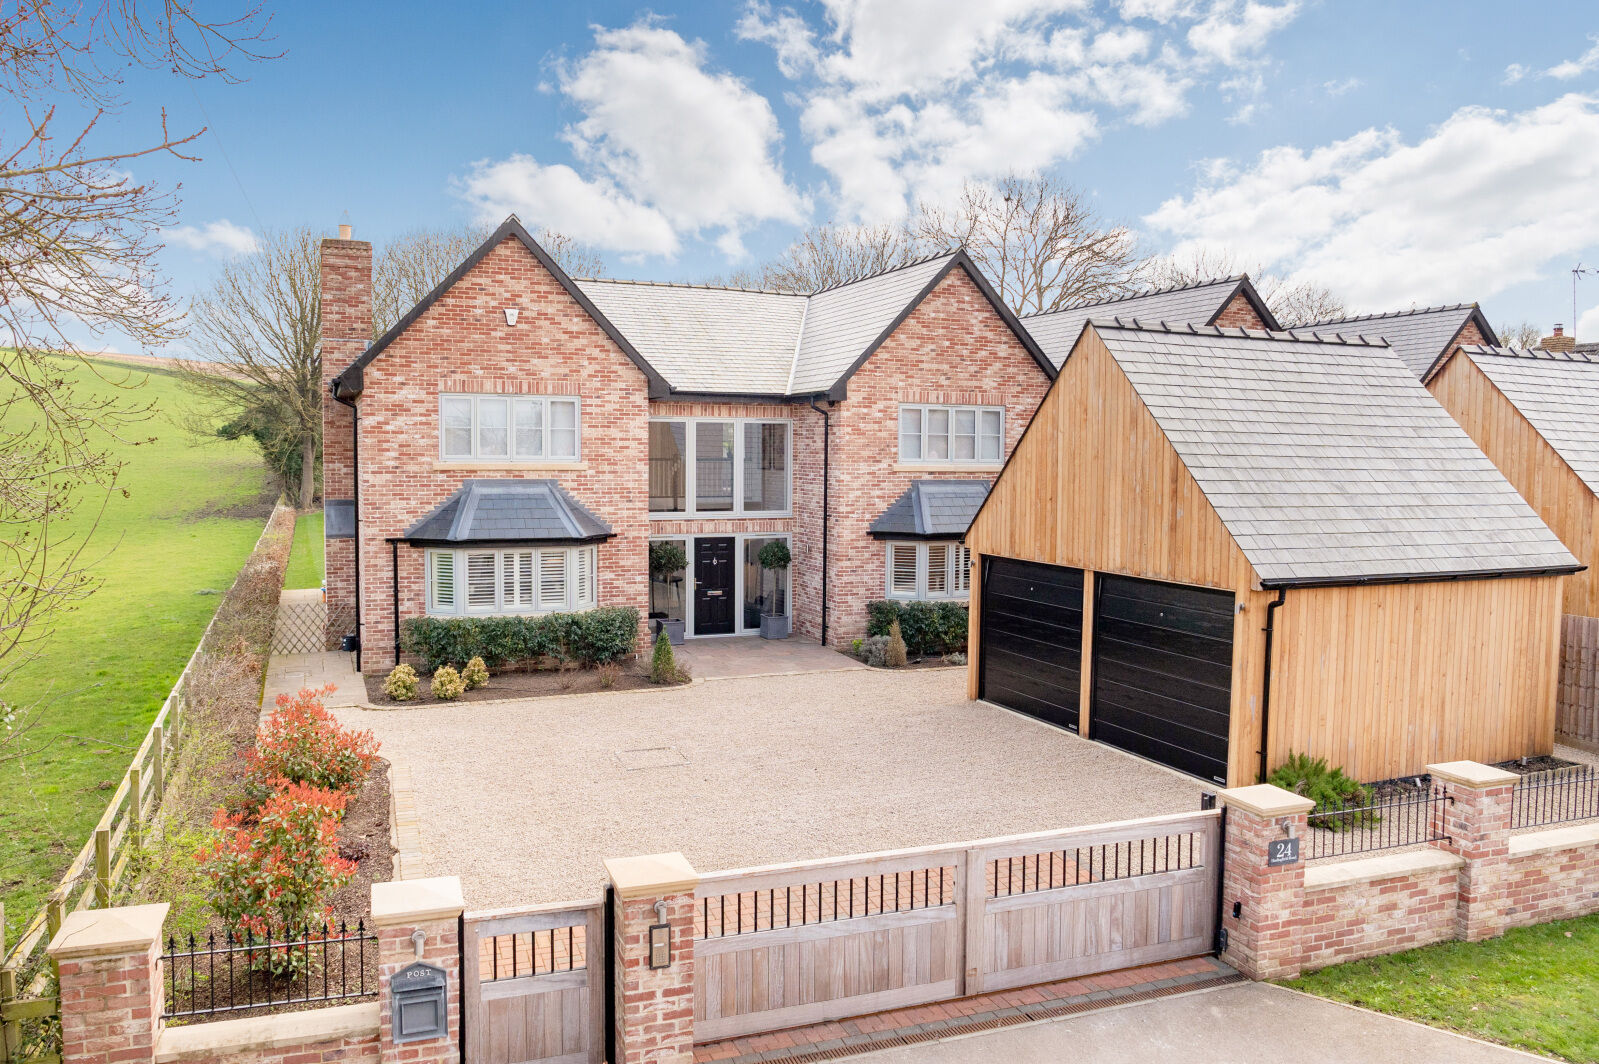 5 bedroom detached house for sale Haslingfield Road, Harlton, CB23, main image